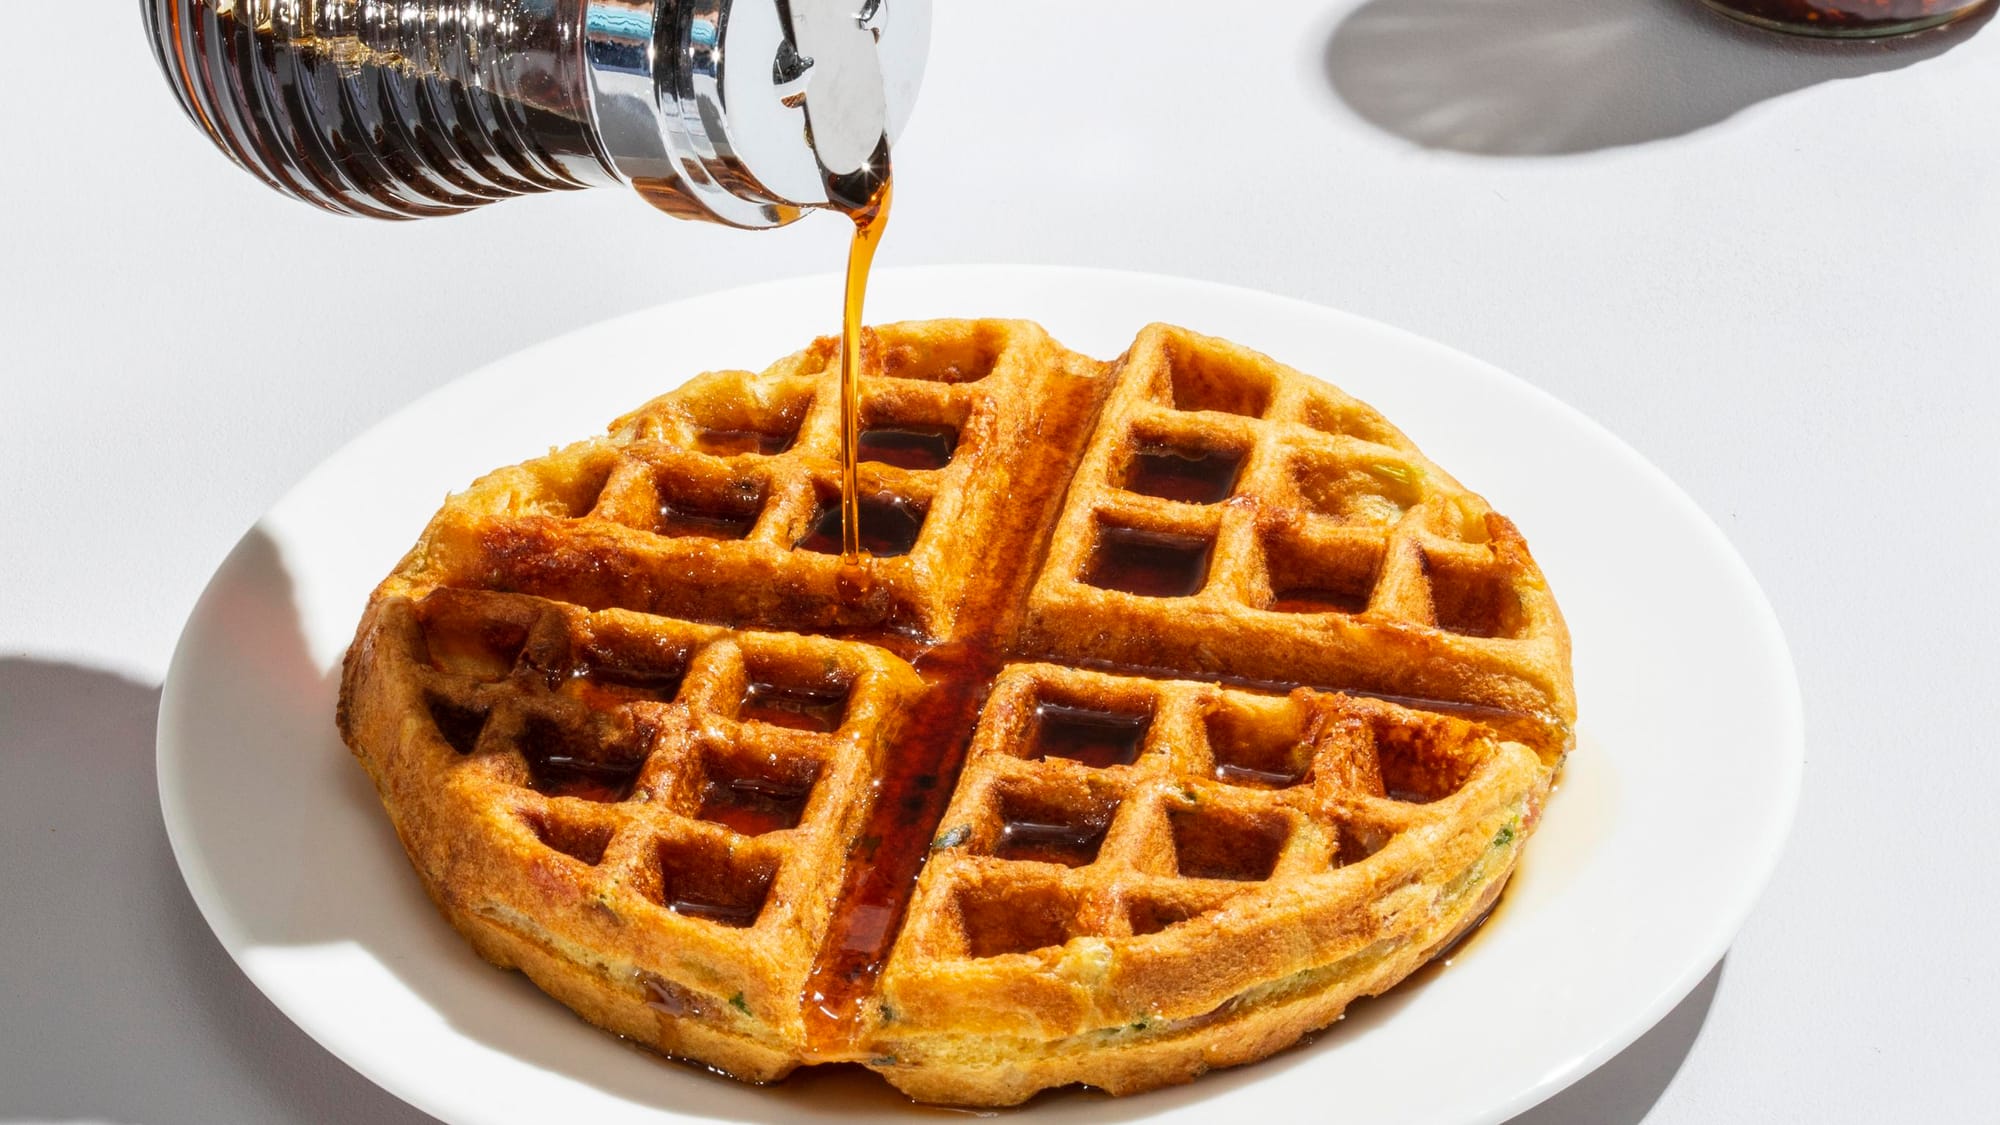 The best waffles are crisp on the outside and creamy on the inside